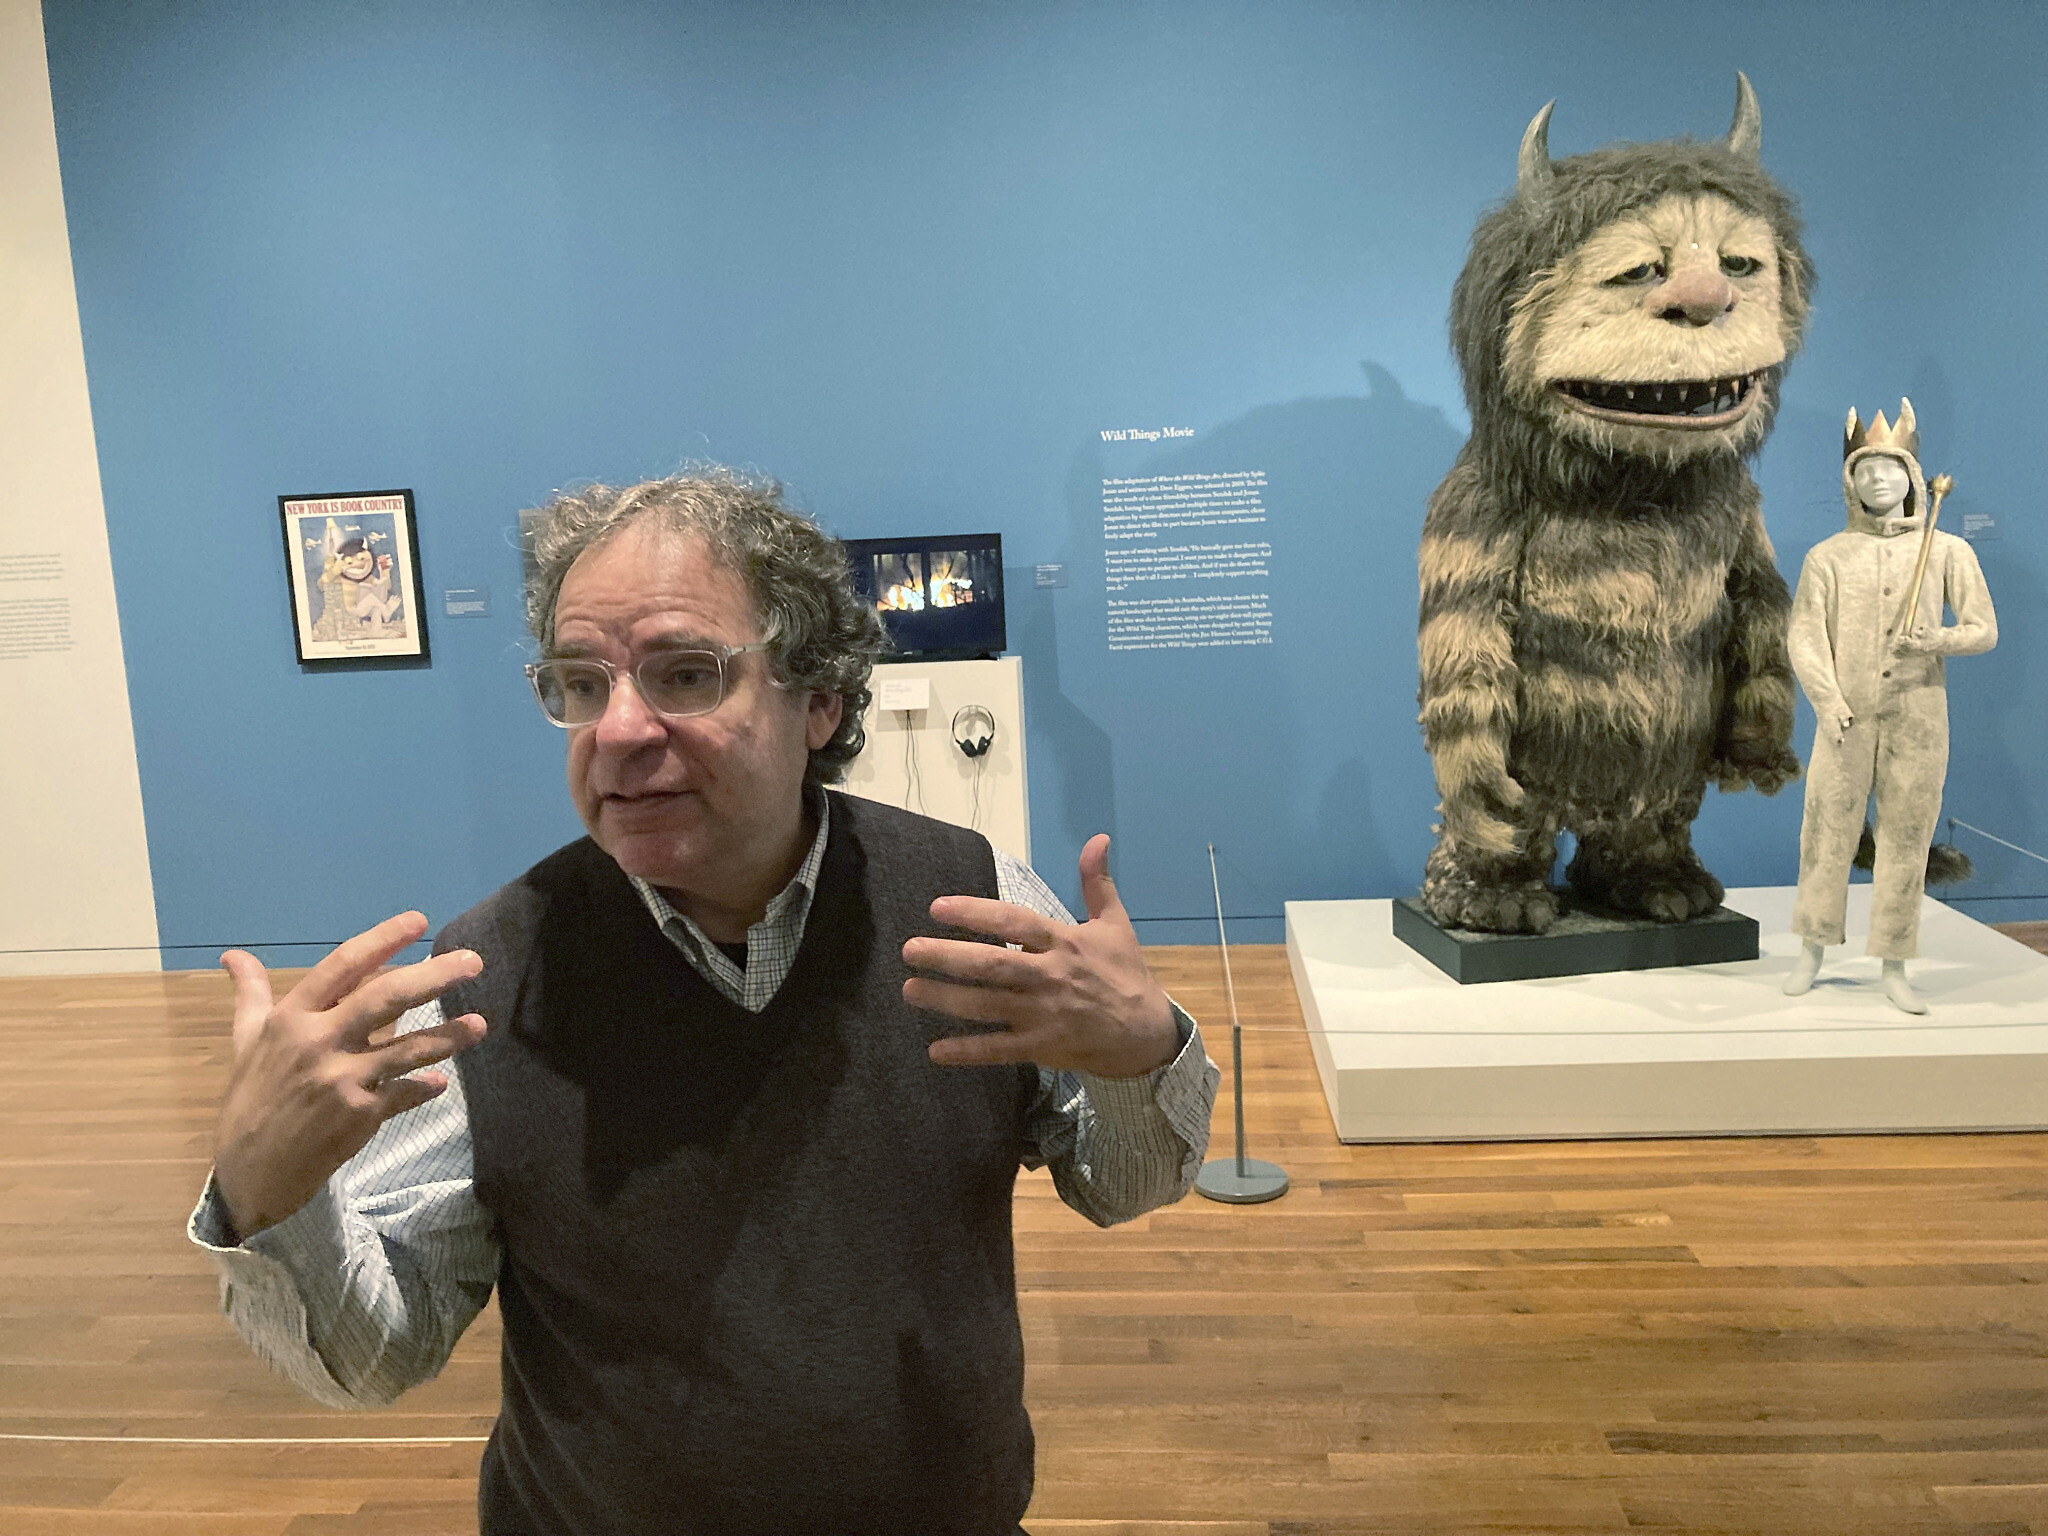 Ohio exhibit romps through work of 'Where the Wild Things Are' artist